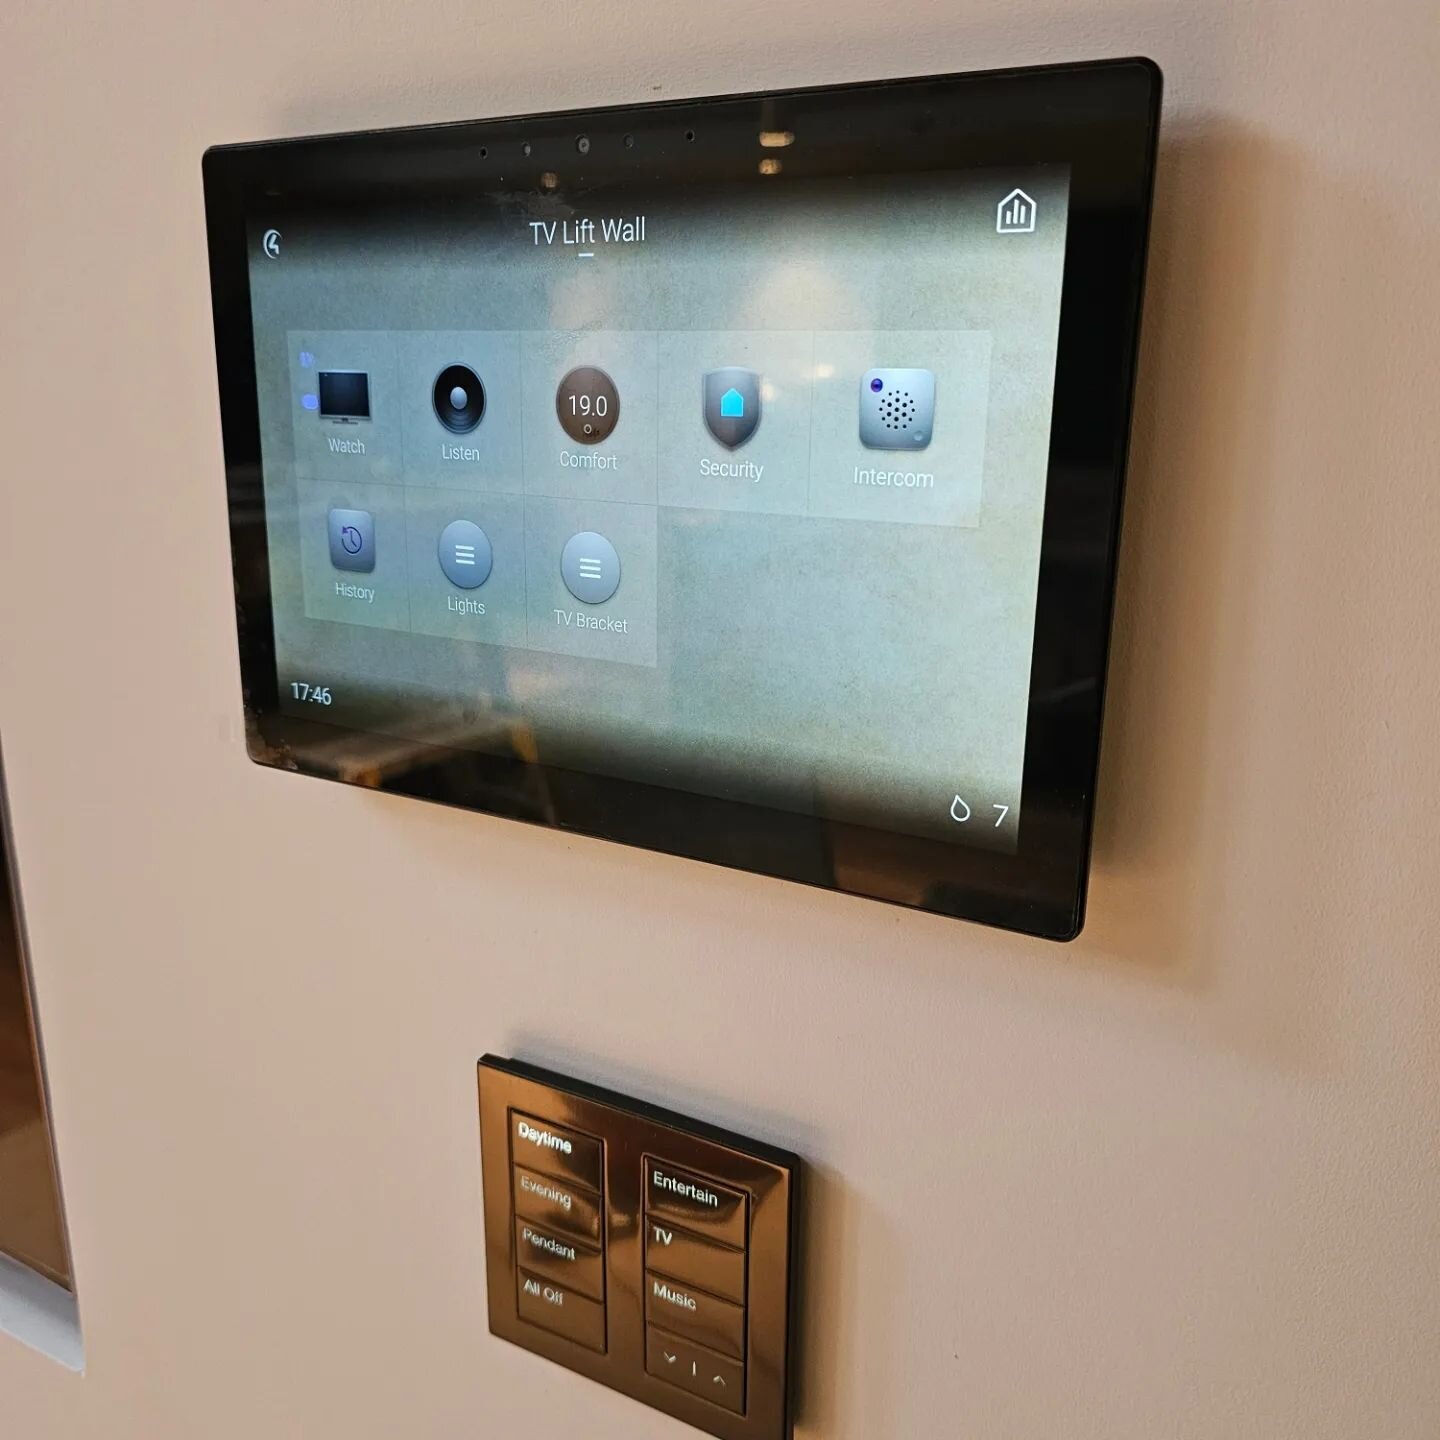 Control4 touchpanel with a Lutron Palladiom Keypad beneath it
Allowing easy control of the whole home
.
.
.
#control4 #lutron